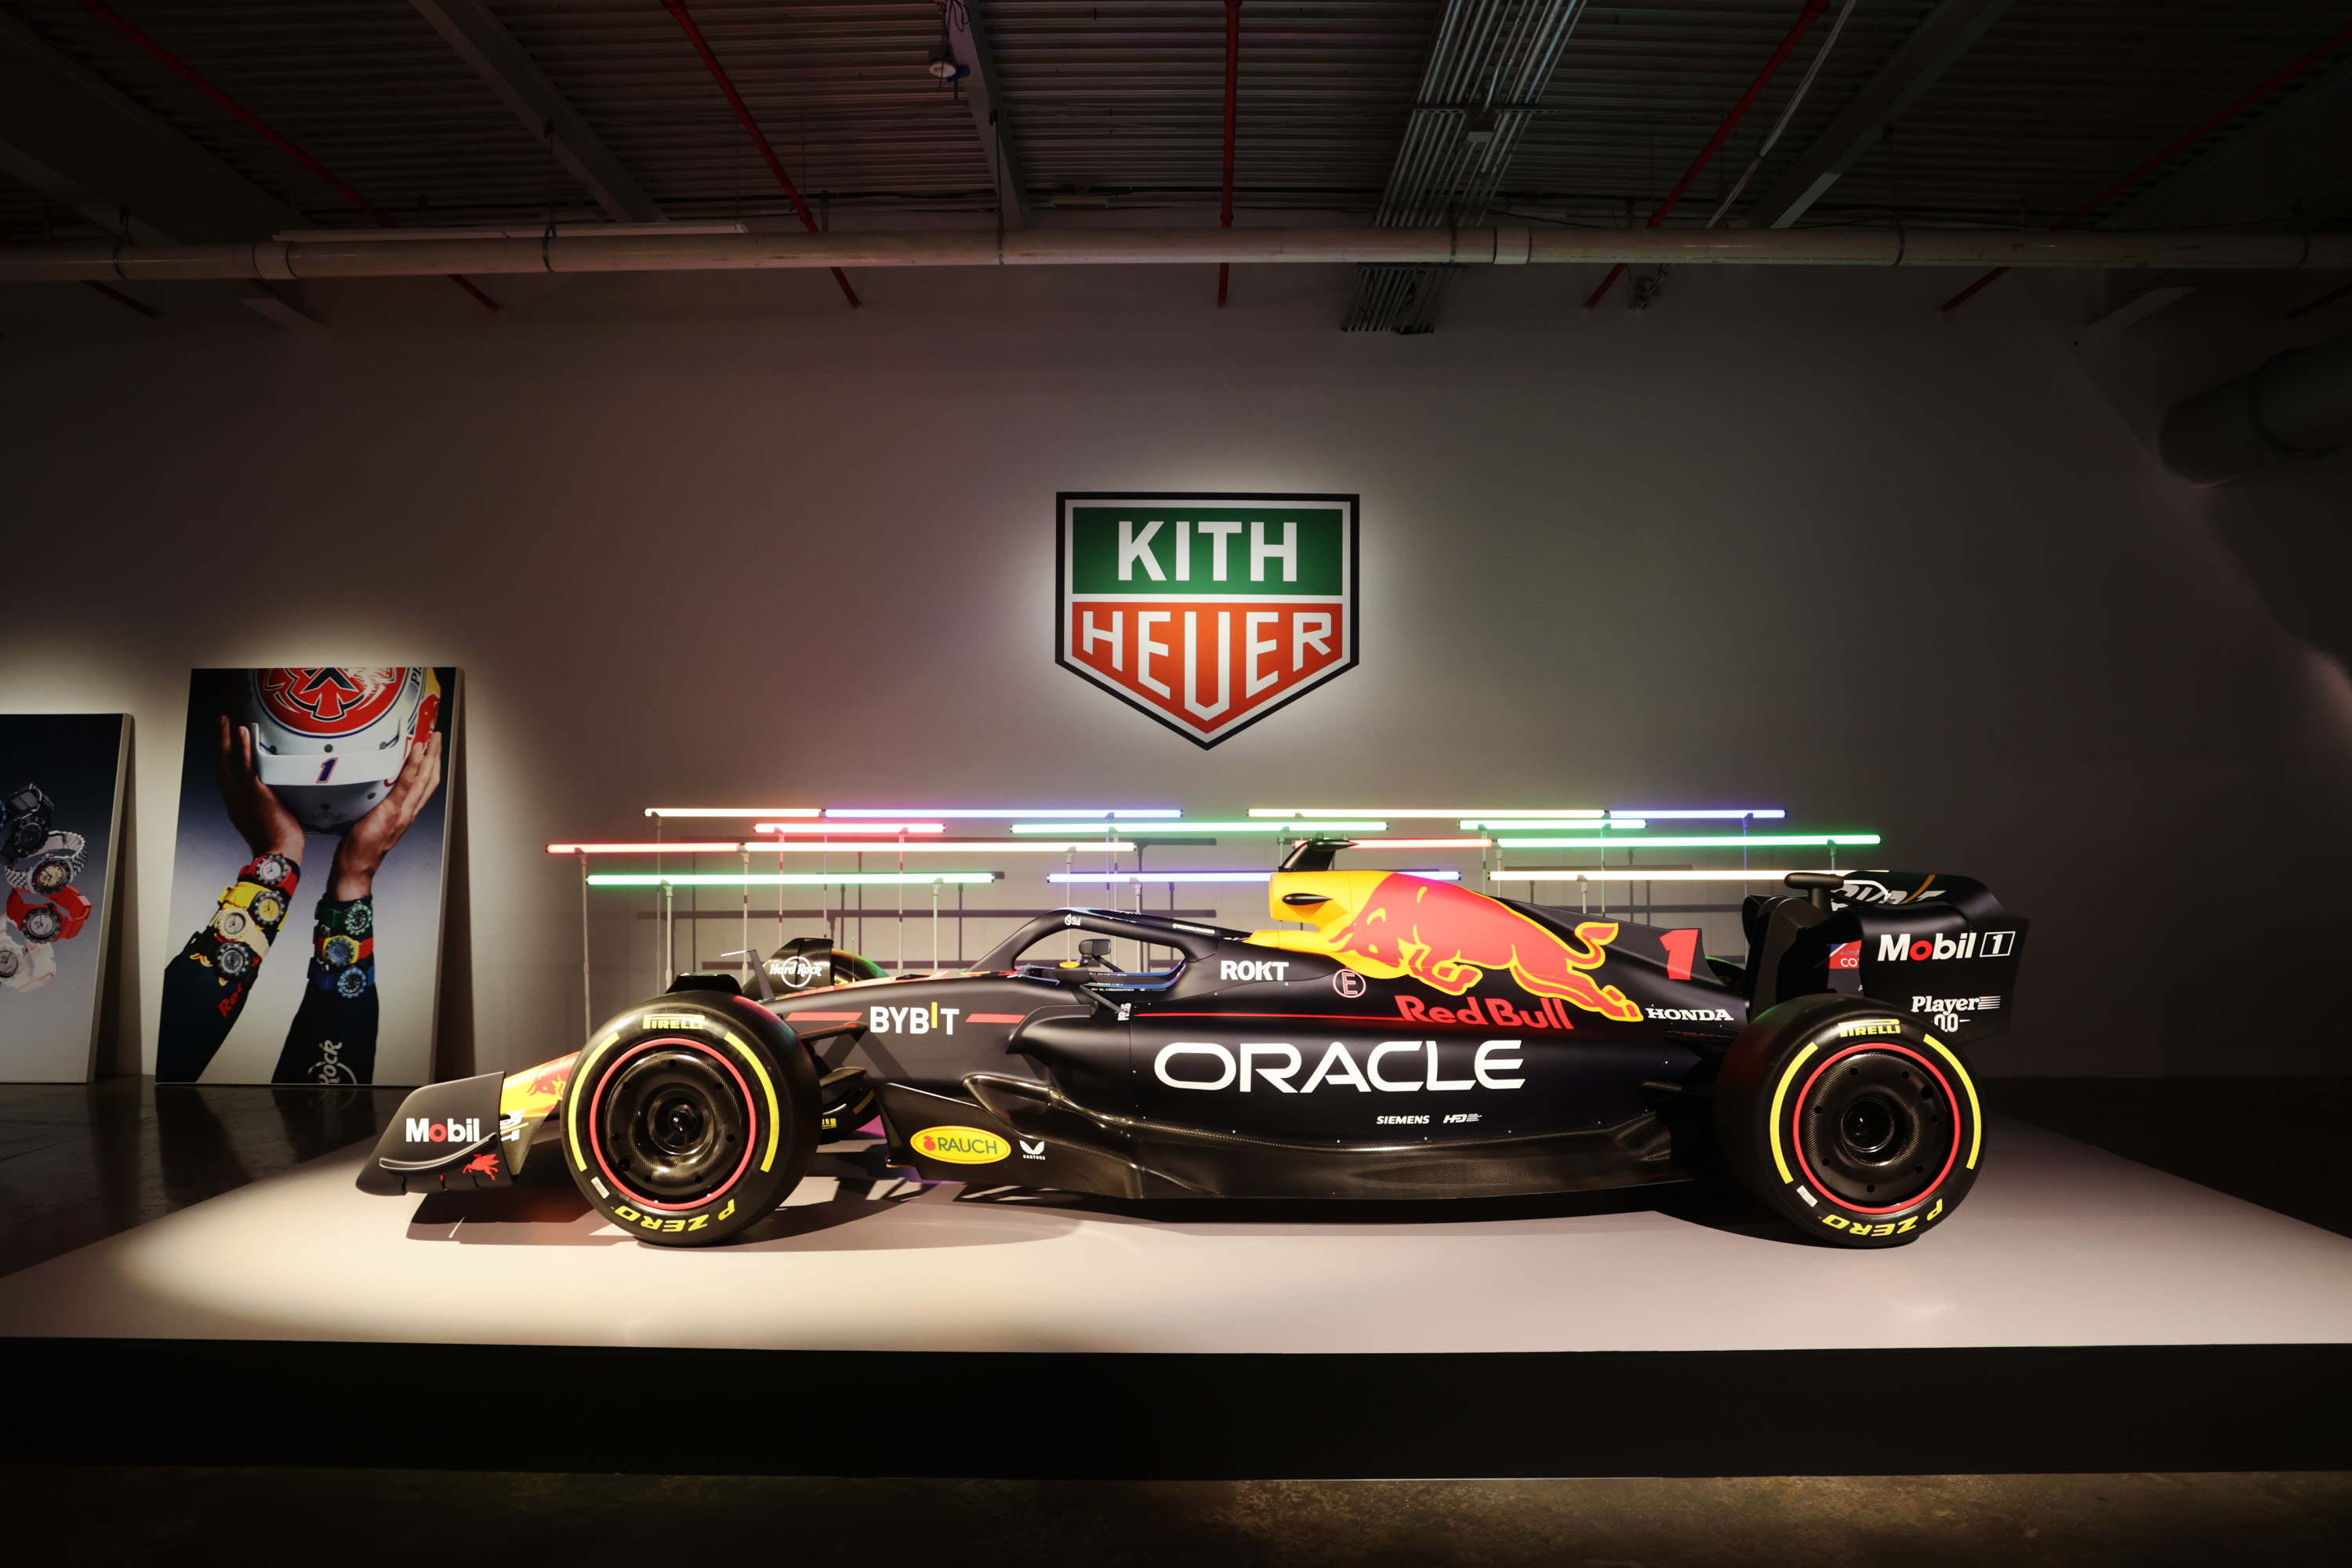 Tag Heuer Takes Over Race Week in Miami to Celebrate Formula One